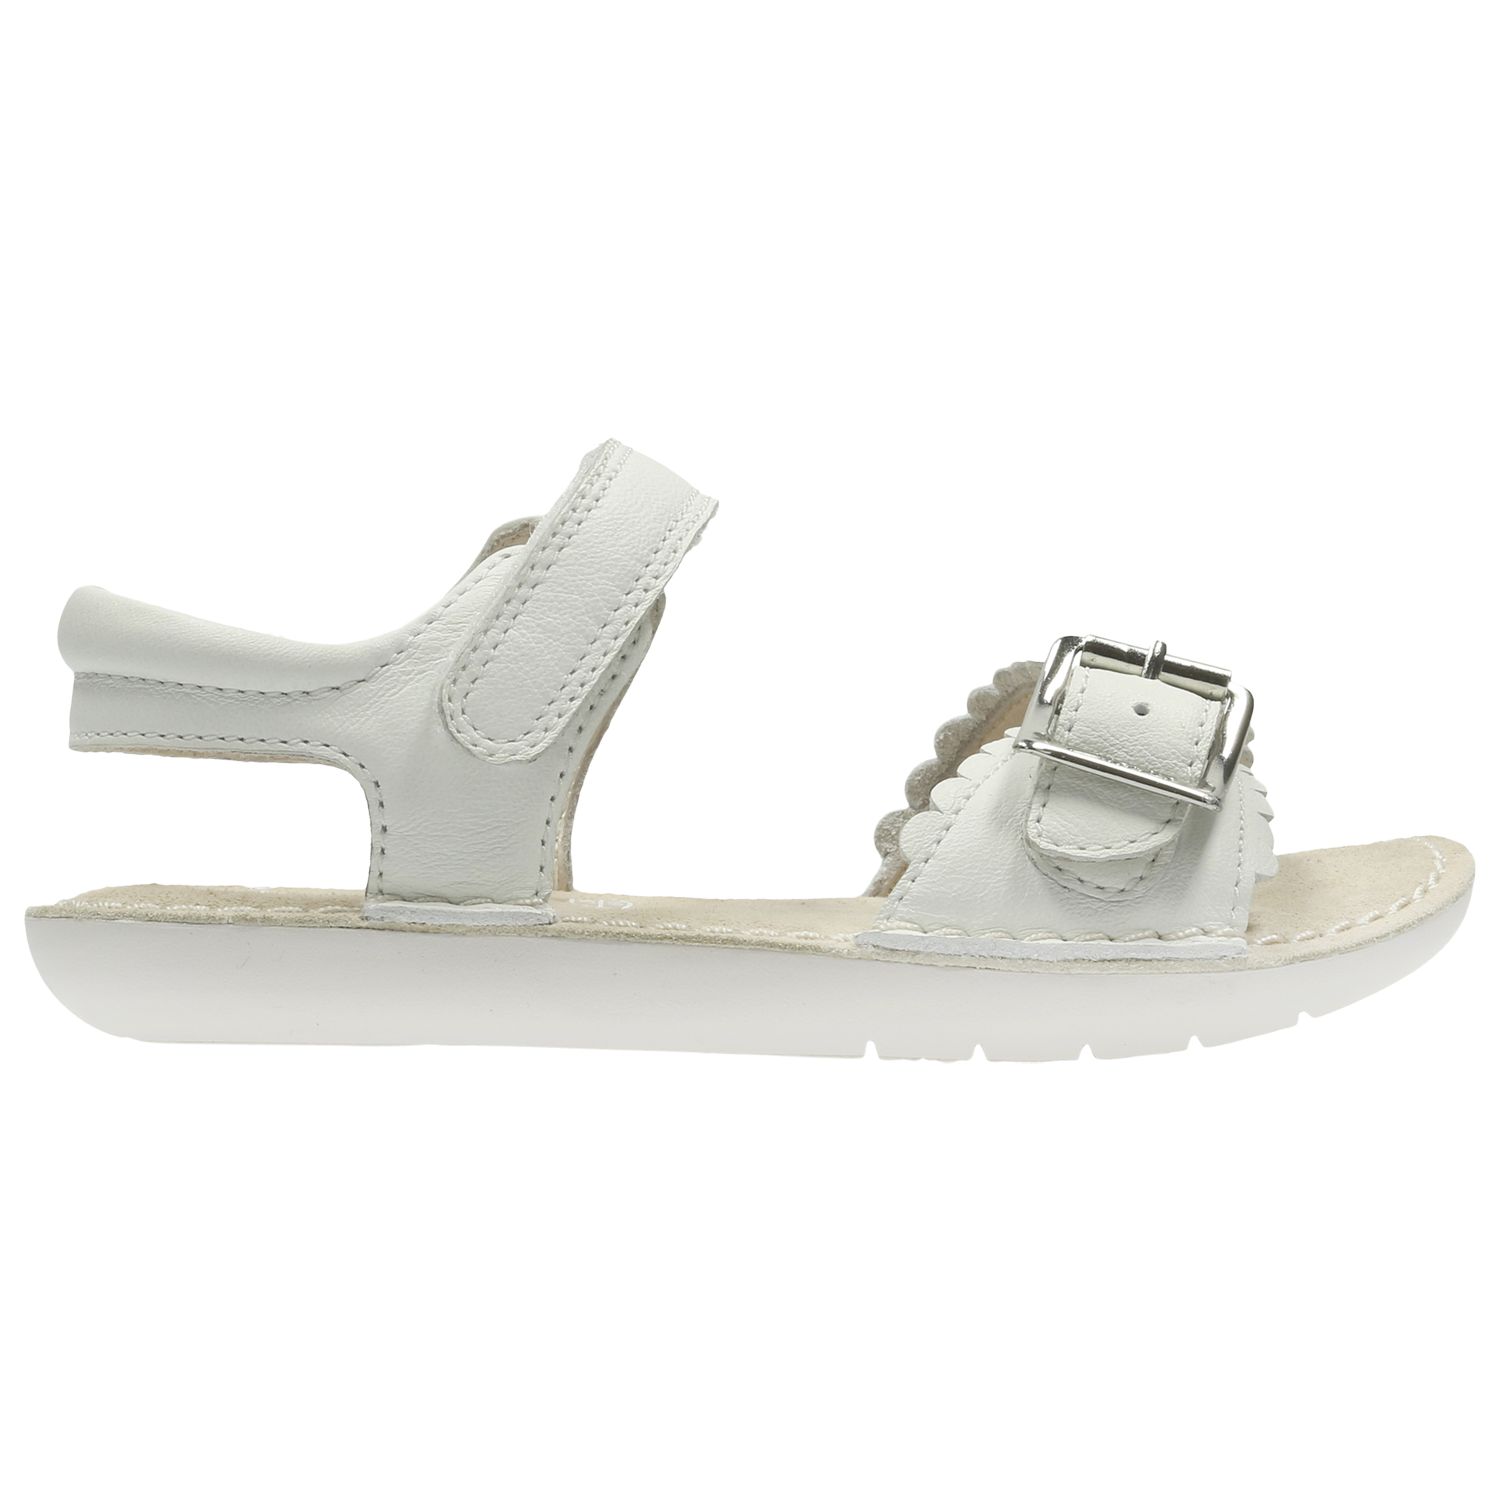 clarks ivy blossom sandals